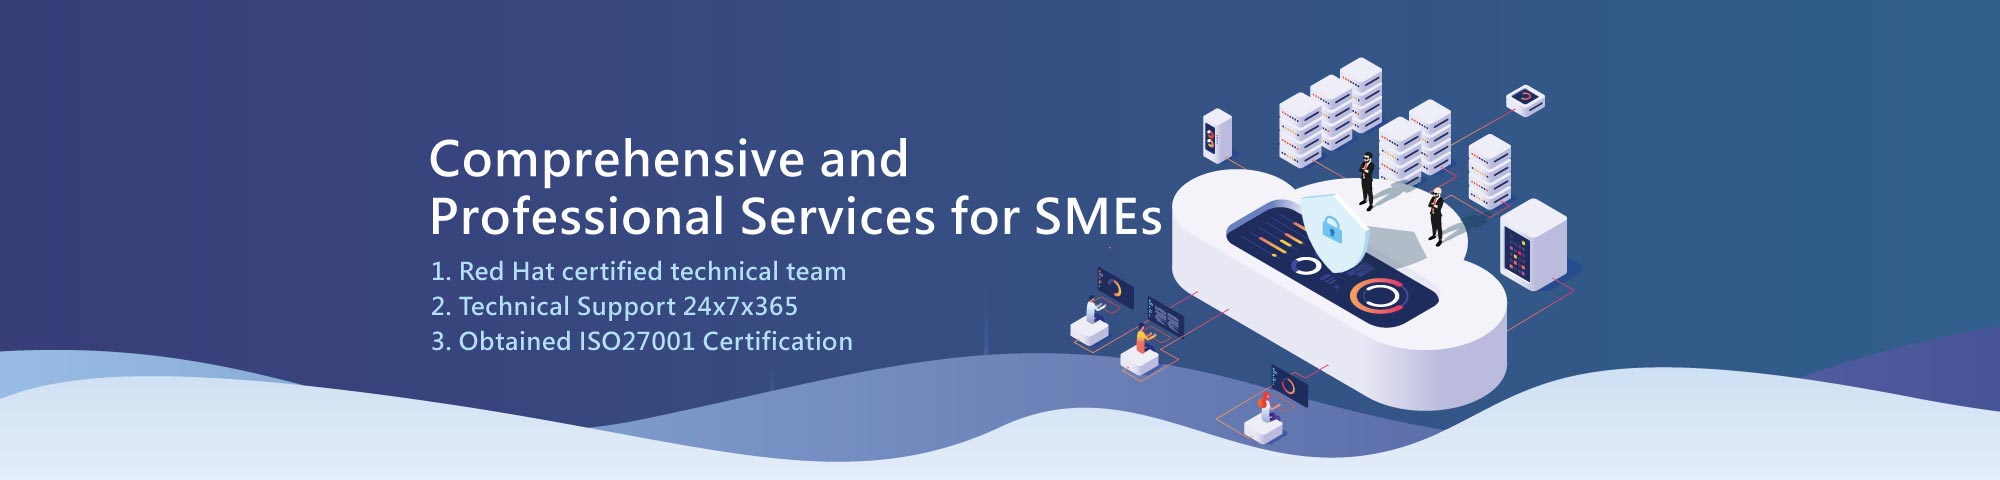 comprehensive and professional services of SMEs